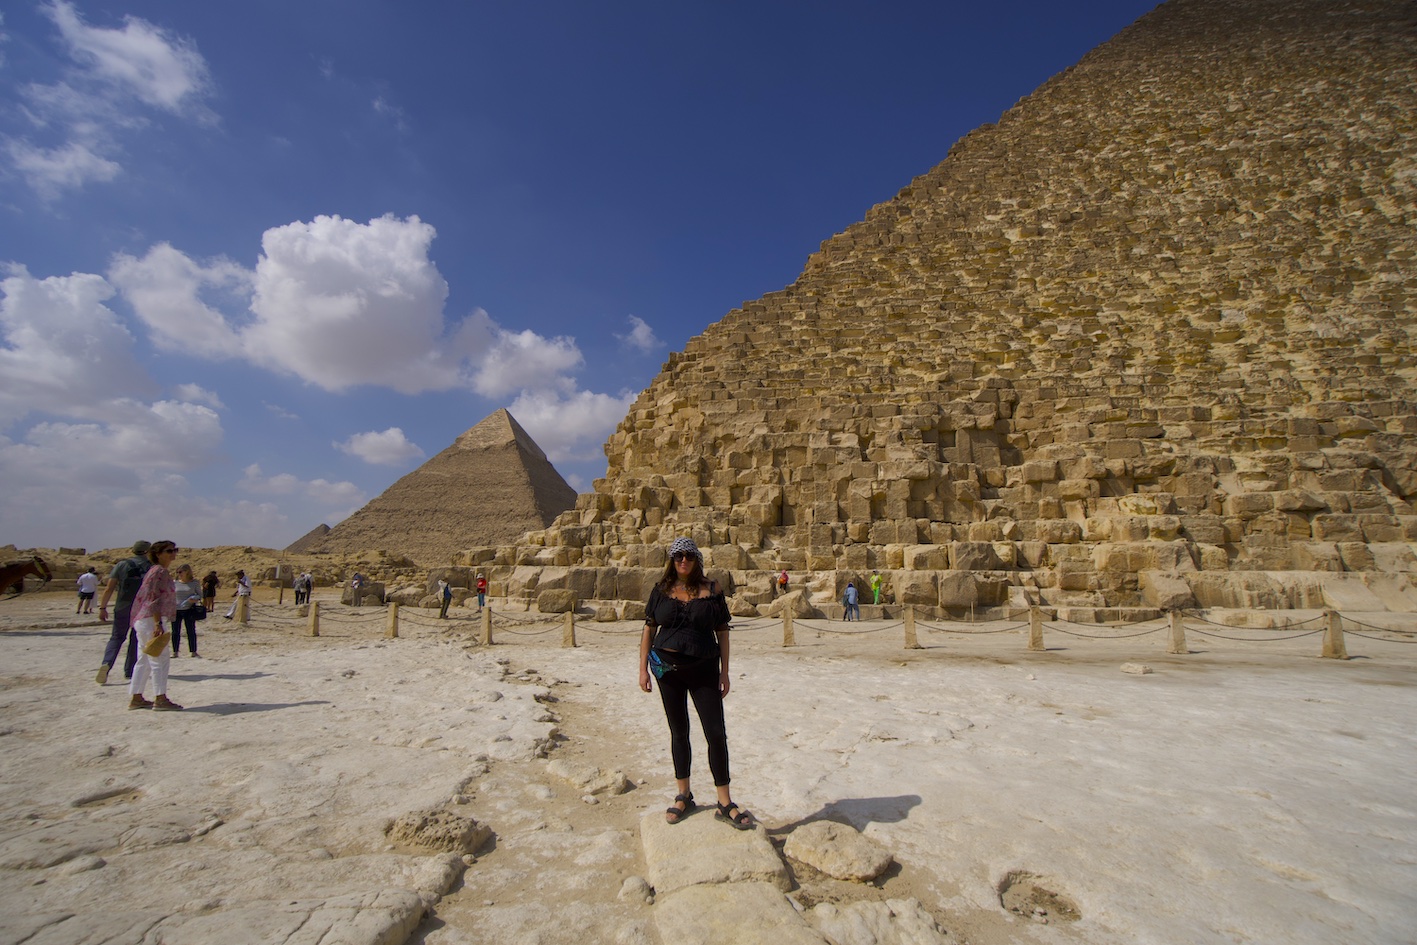 Pilar with a view of the Khufu and Mekerinos Pyramids behind